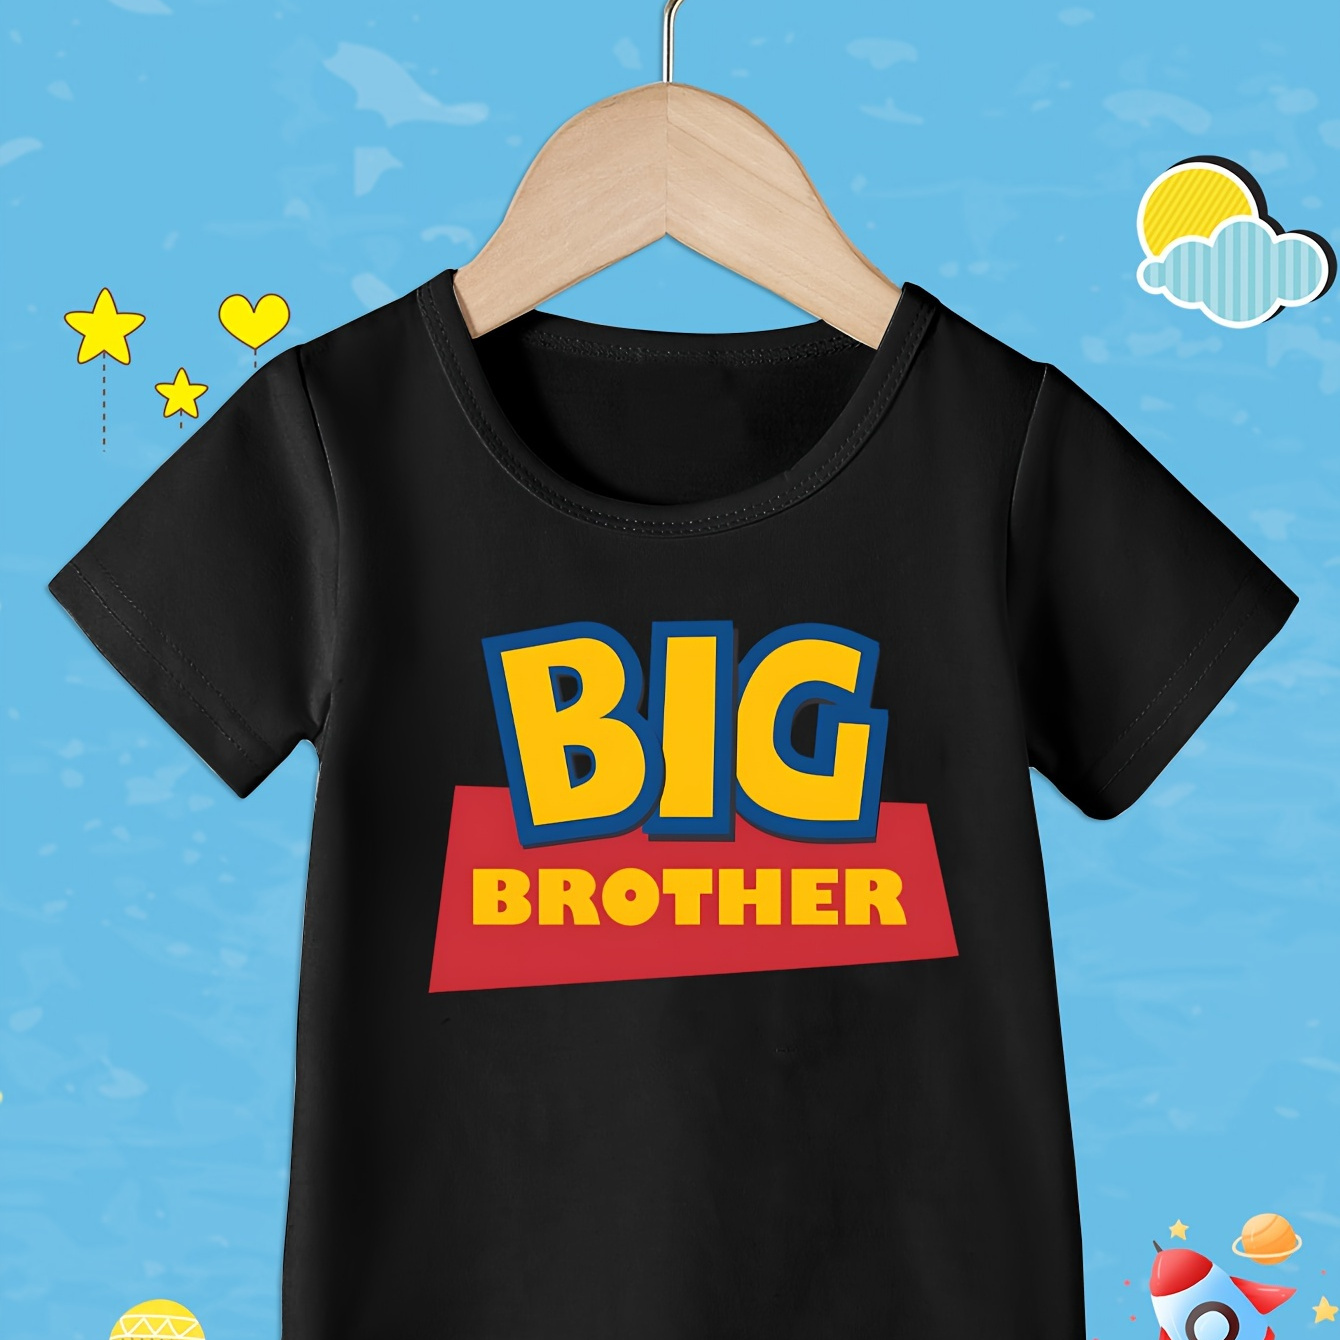 

Big Brother Print Crew Neck T-shirt, Short Sleeve Casual Comfortable Summer Tee Tops For Boys